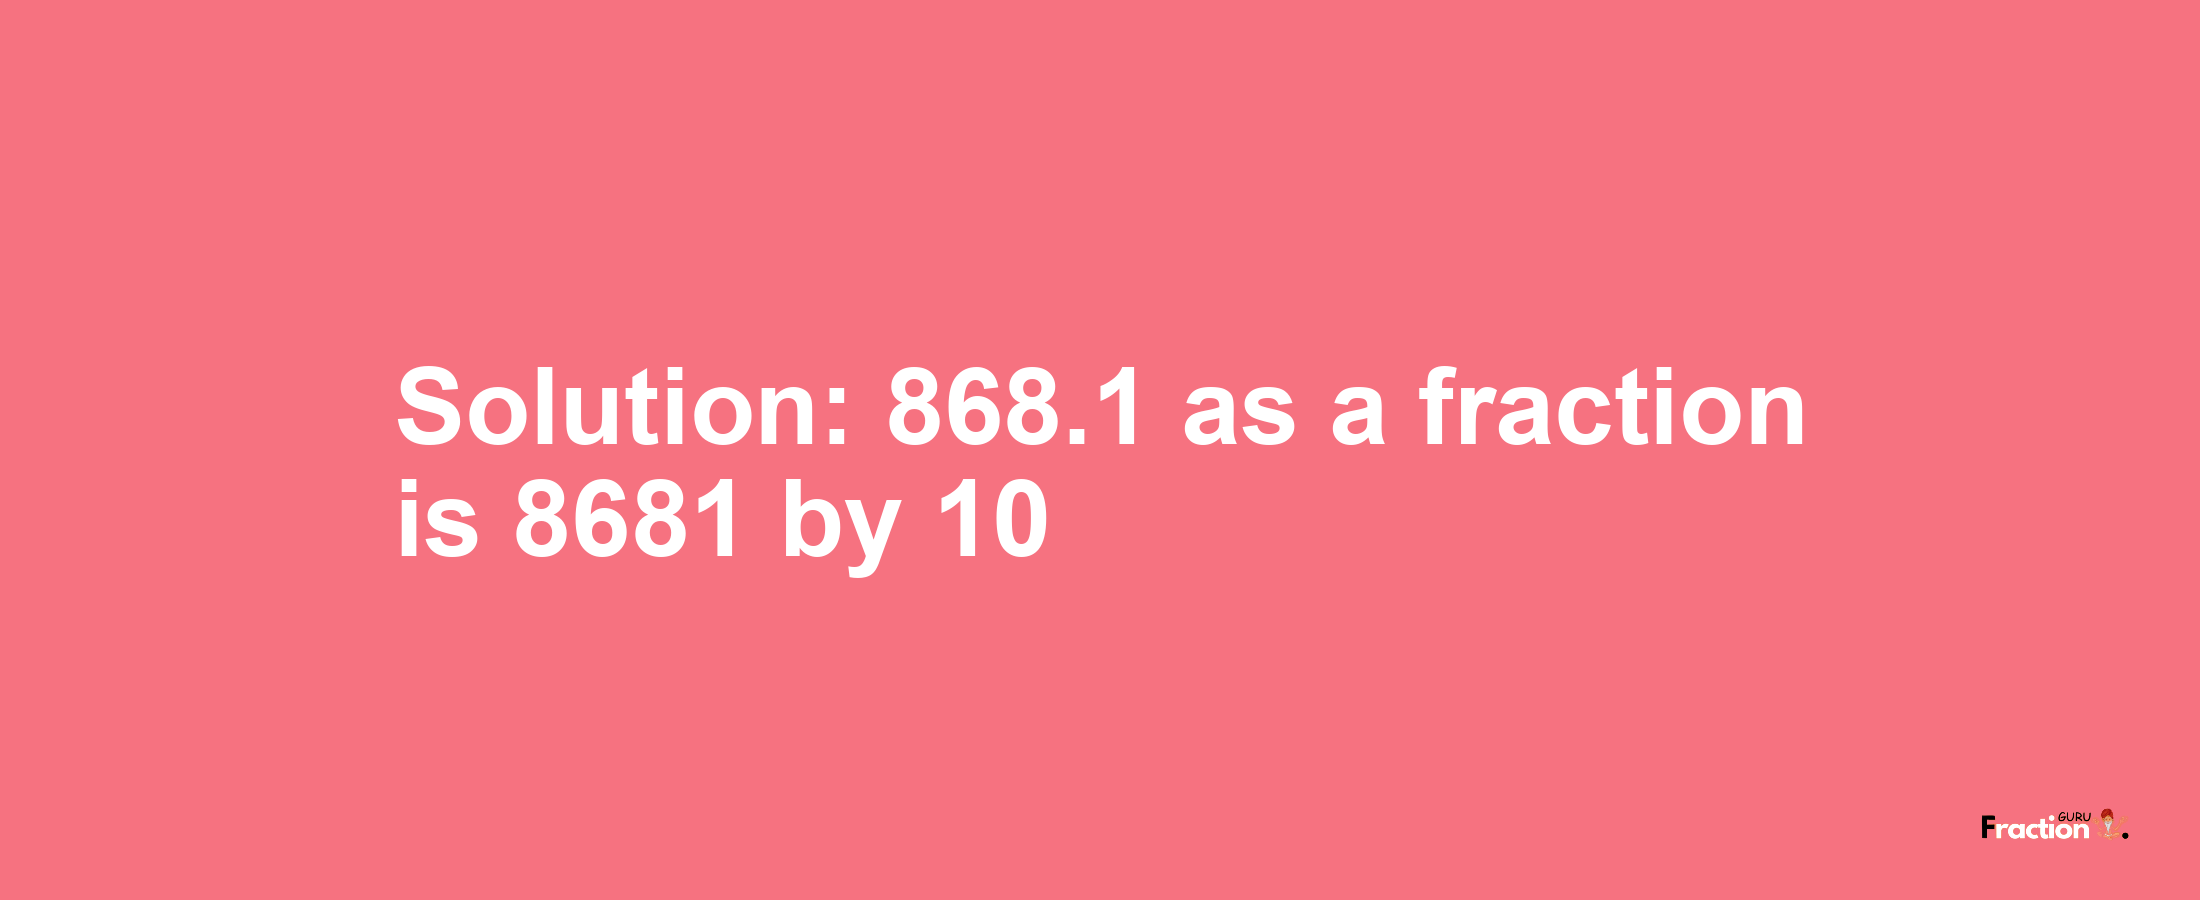 Solution:868.1 as a fraction is 8681/10